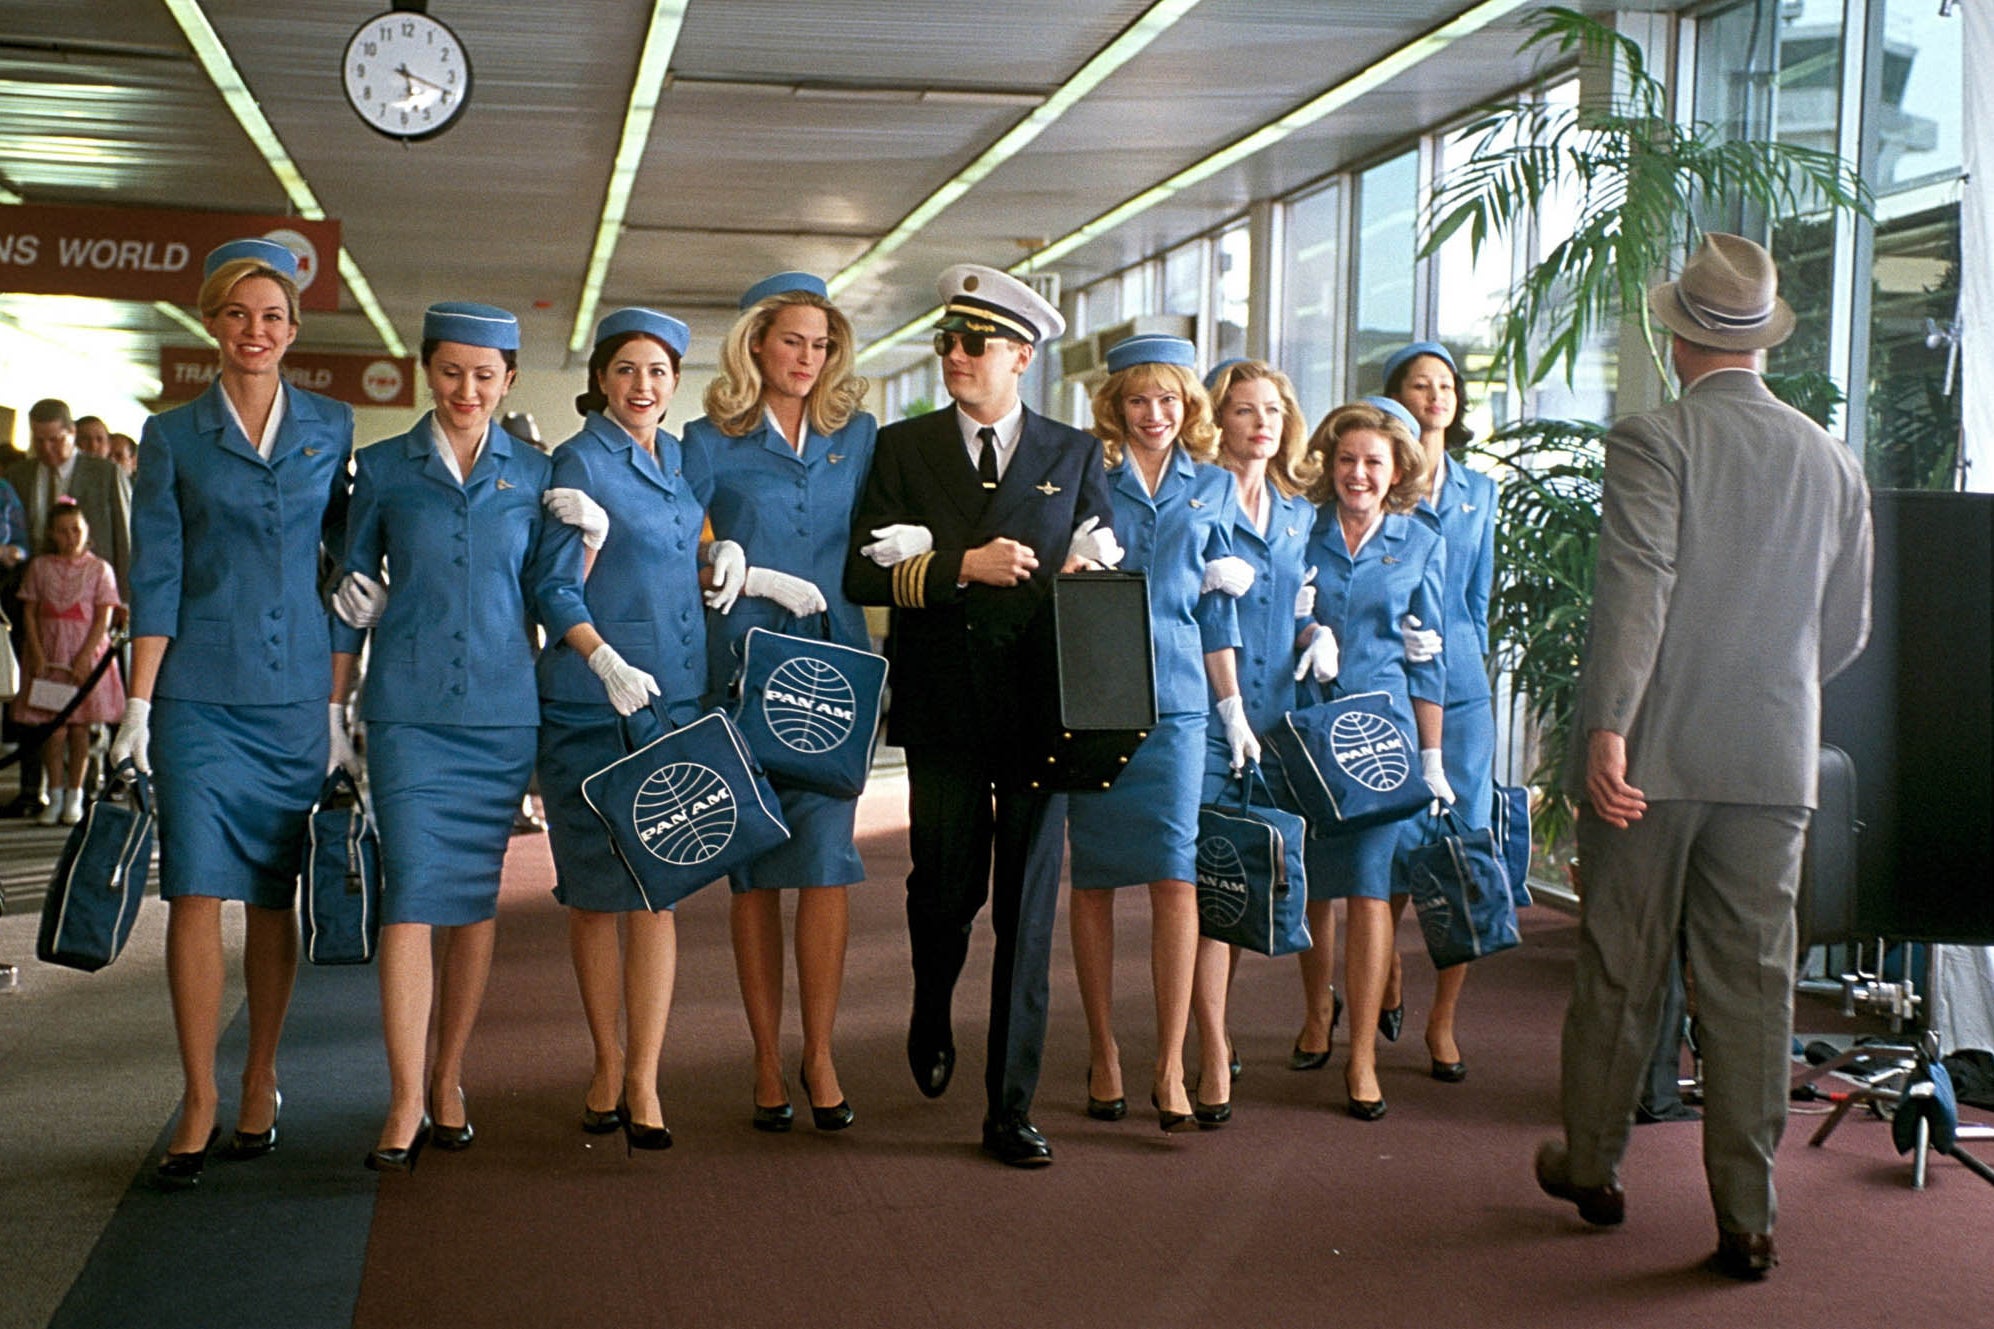 Leonardo DiCaprio dressed as a commercial pilot with sunglasses and a briefcase walks through an airport arm in arm with a line of eight Pan Am flight attendants dressed in cerulean uniforms. Smiles are on everyone's faces. 